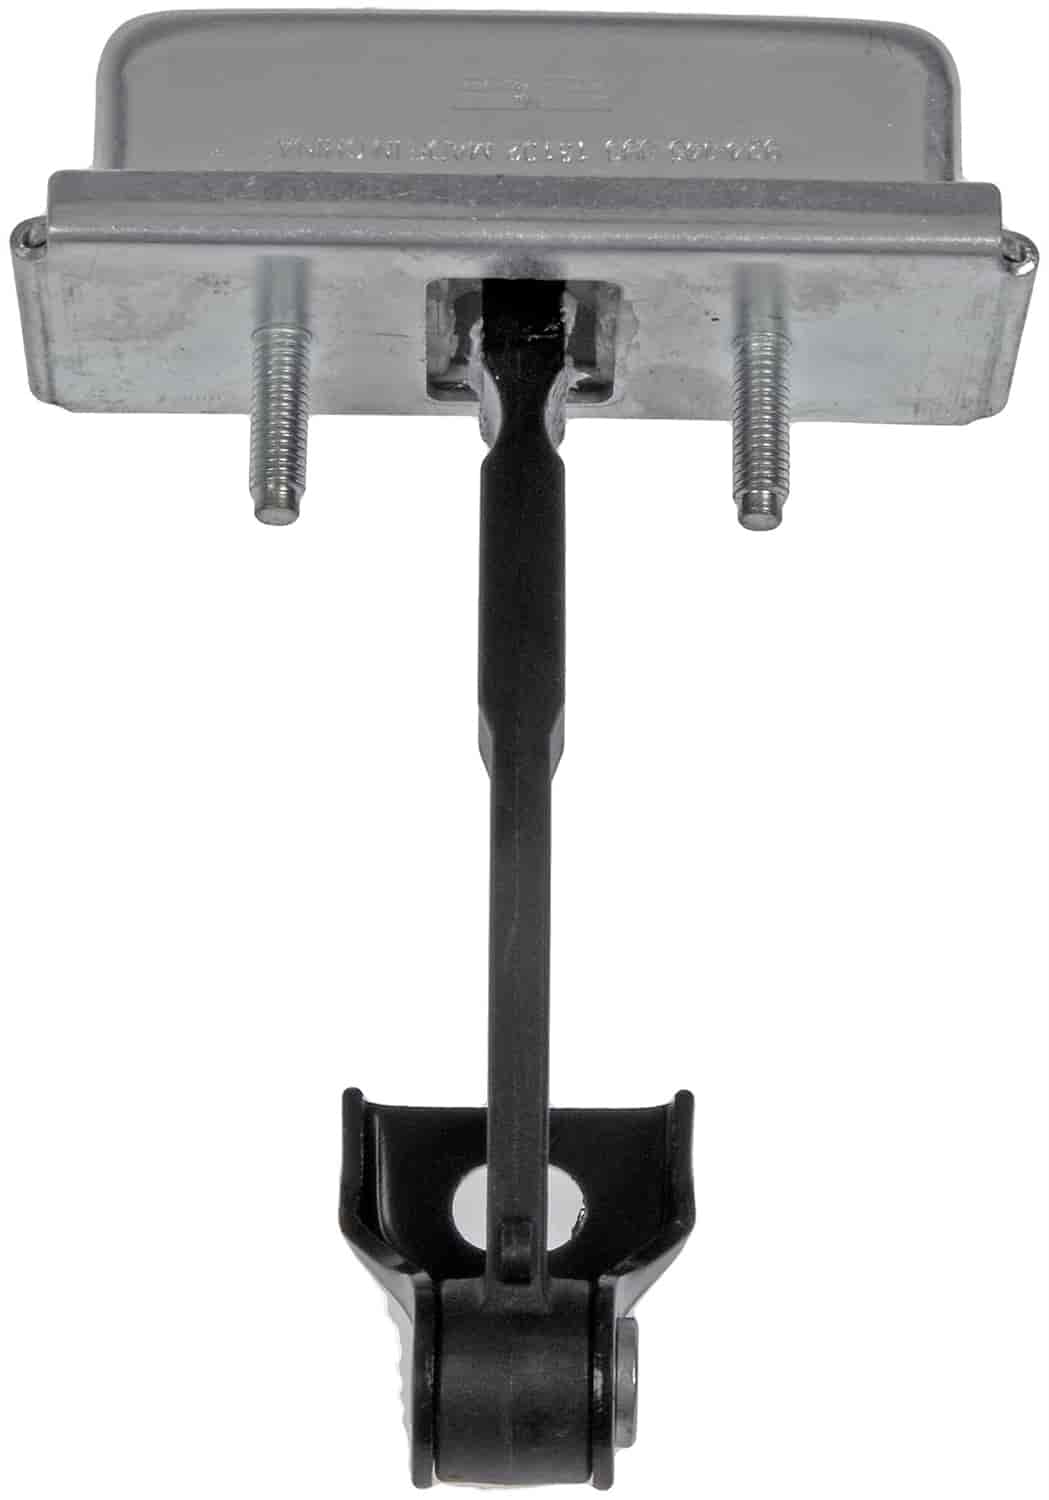 Door Check Assembly 2000-2007 Chevy/GMC, 2002-2006 Cadillac